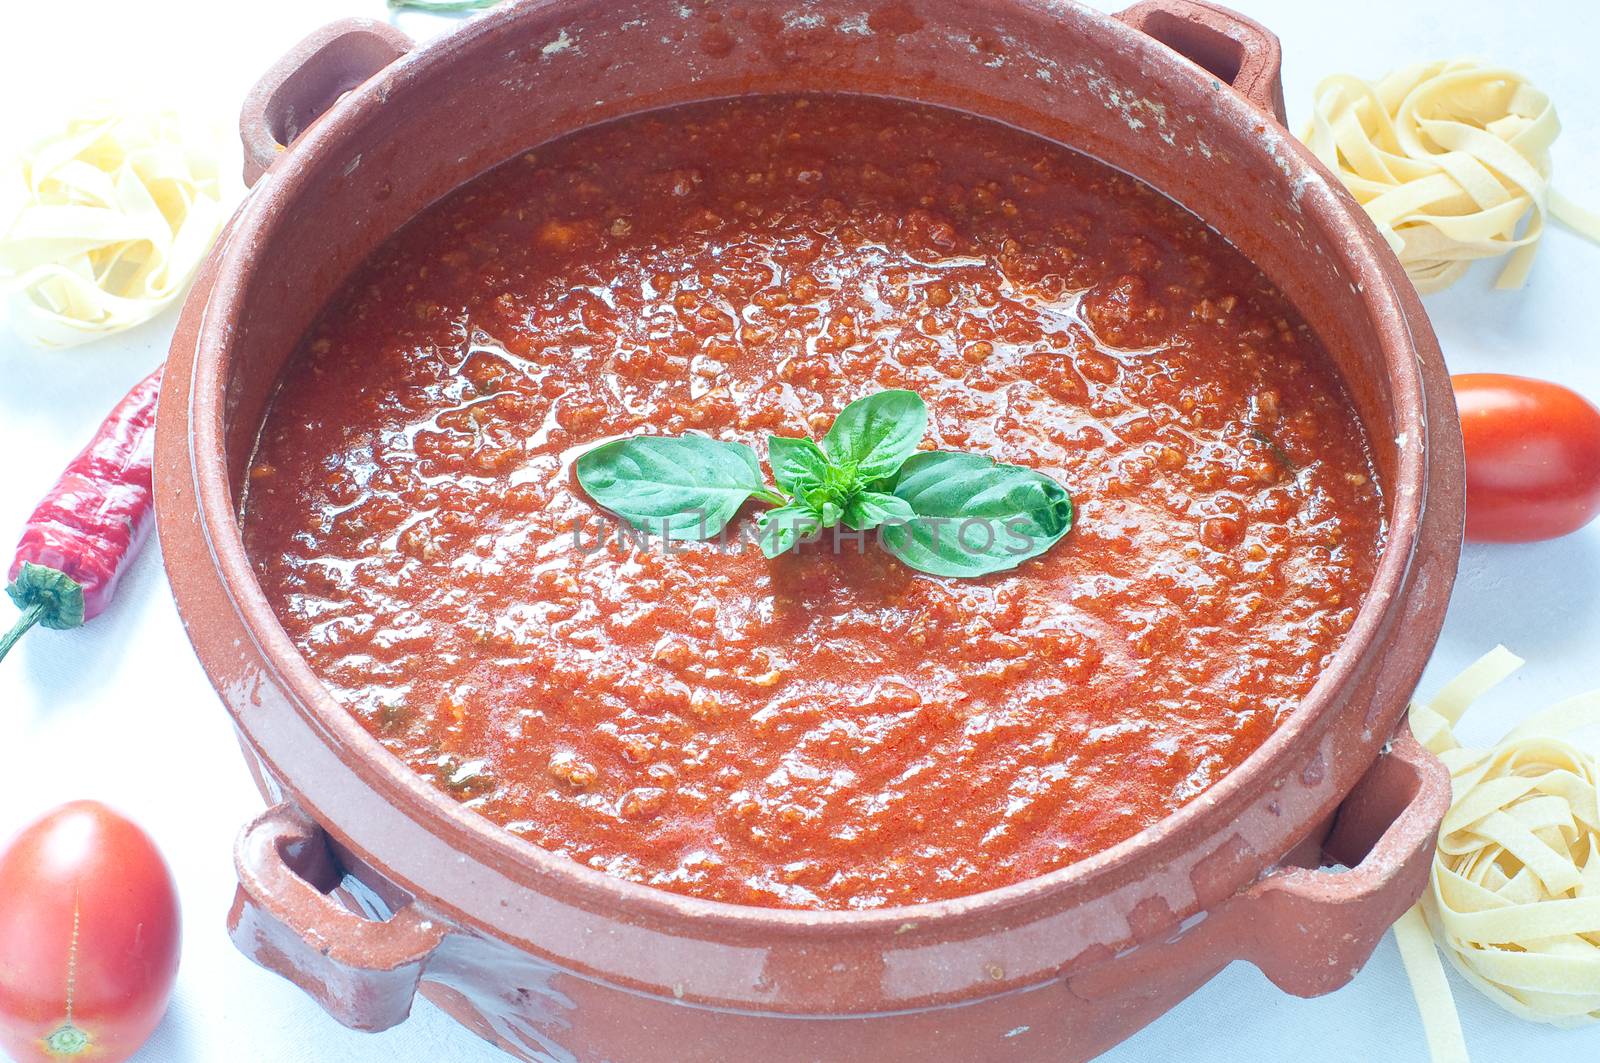 Tomato sauce in a clay pot, italy